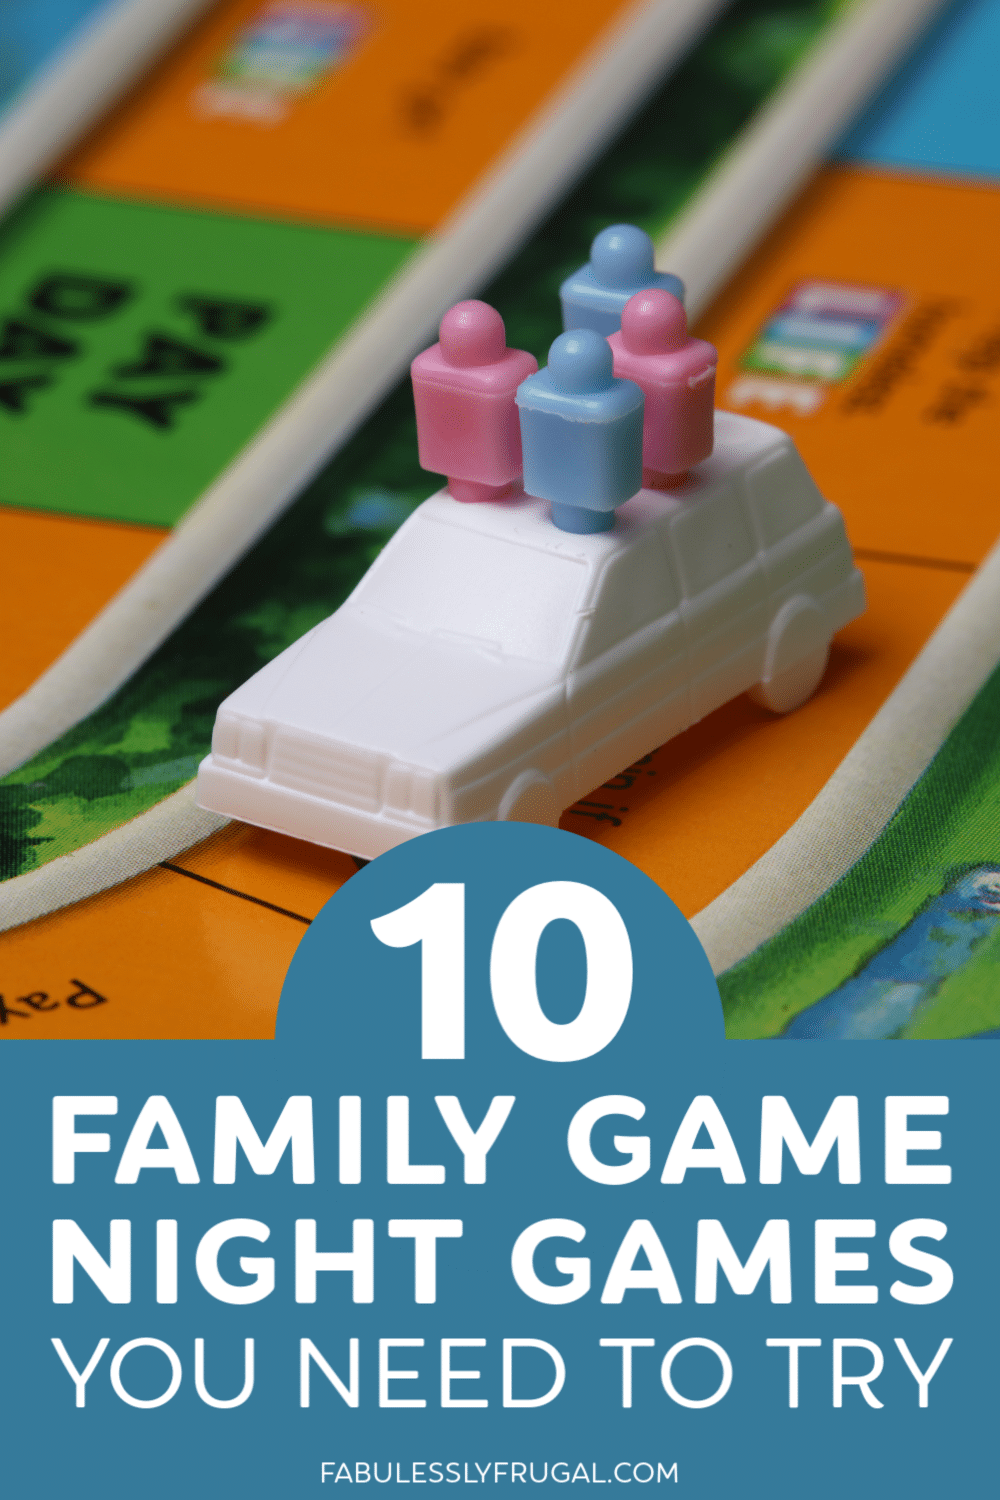 Family game night games